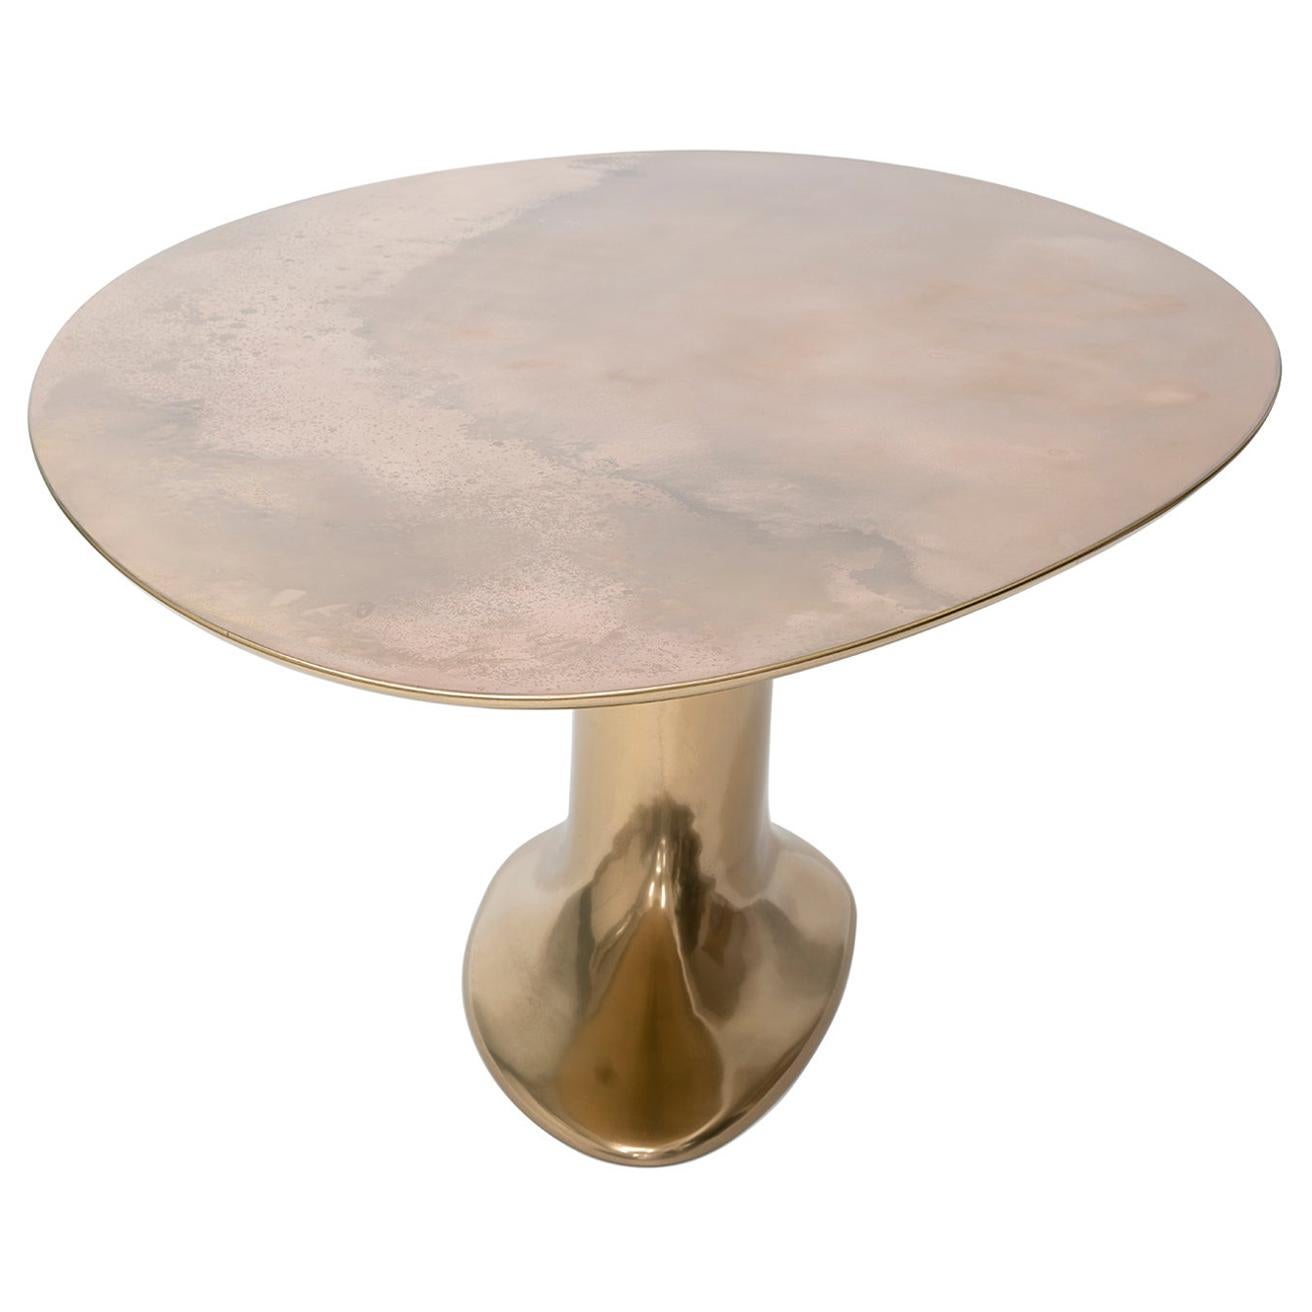 Messier 104, 21st Century Sculptured Oval Bronzed Dining Table